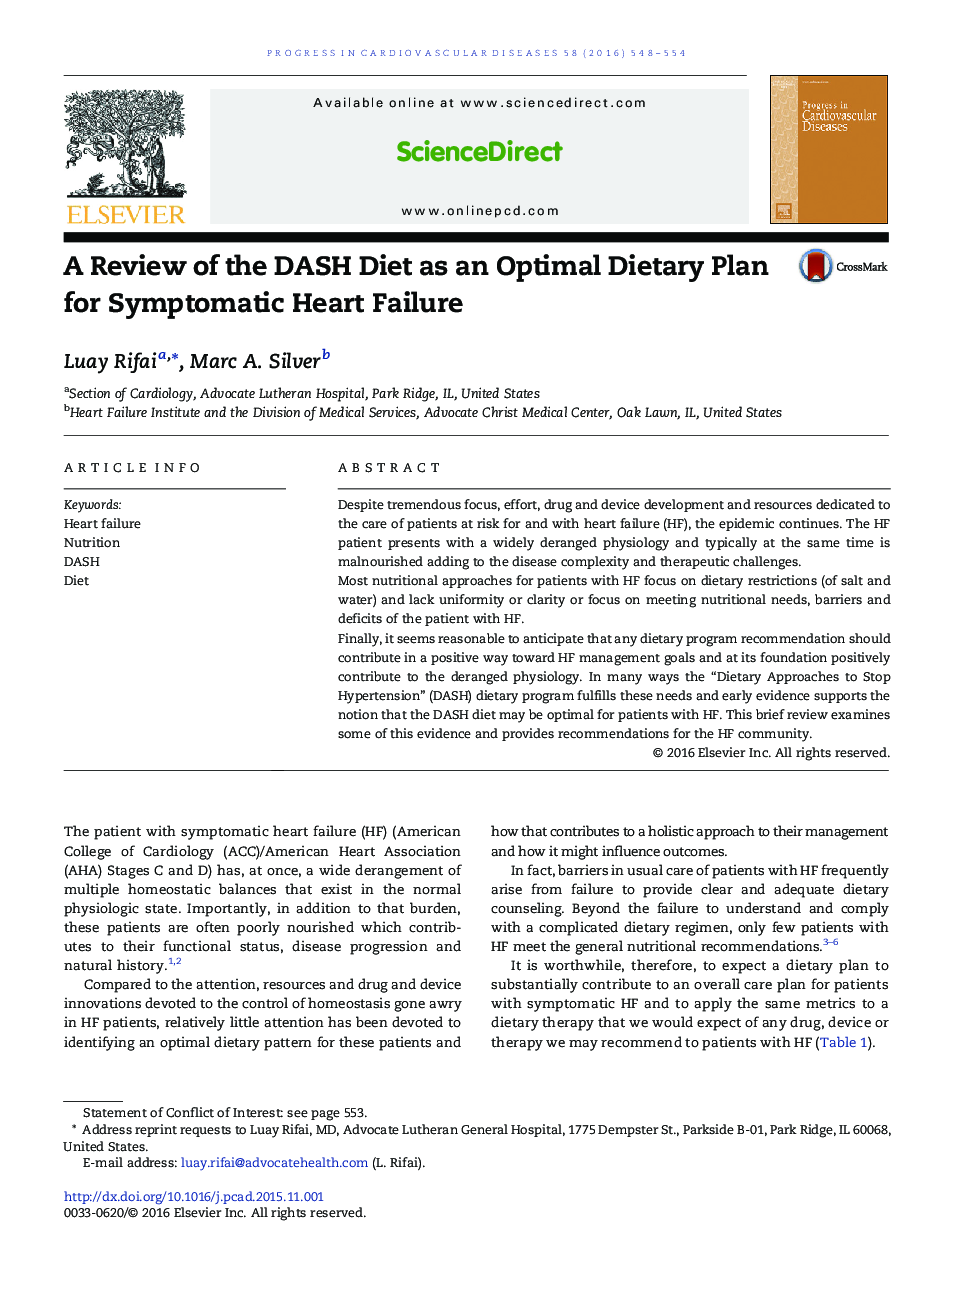 A Review of the DASH Diet as an Optimal Dietary Plan for Symptomatic Heart Failure 